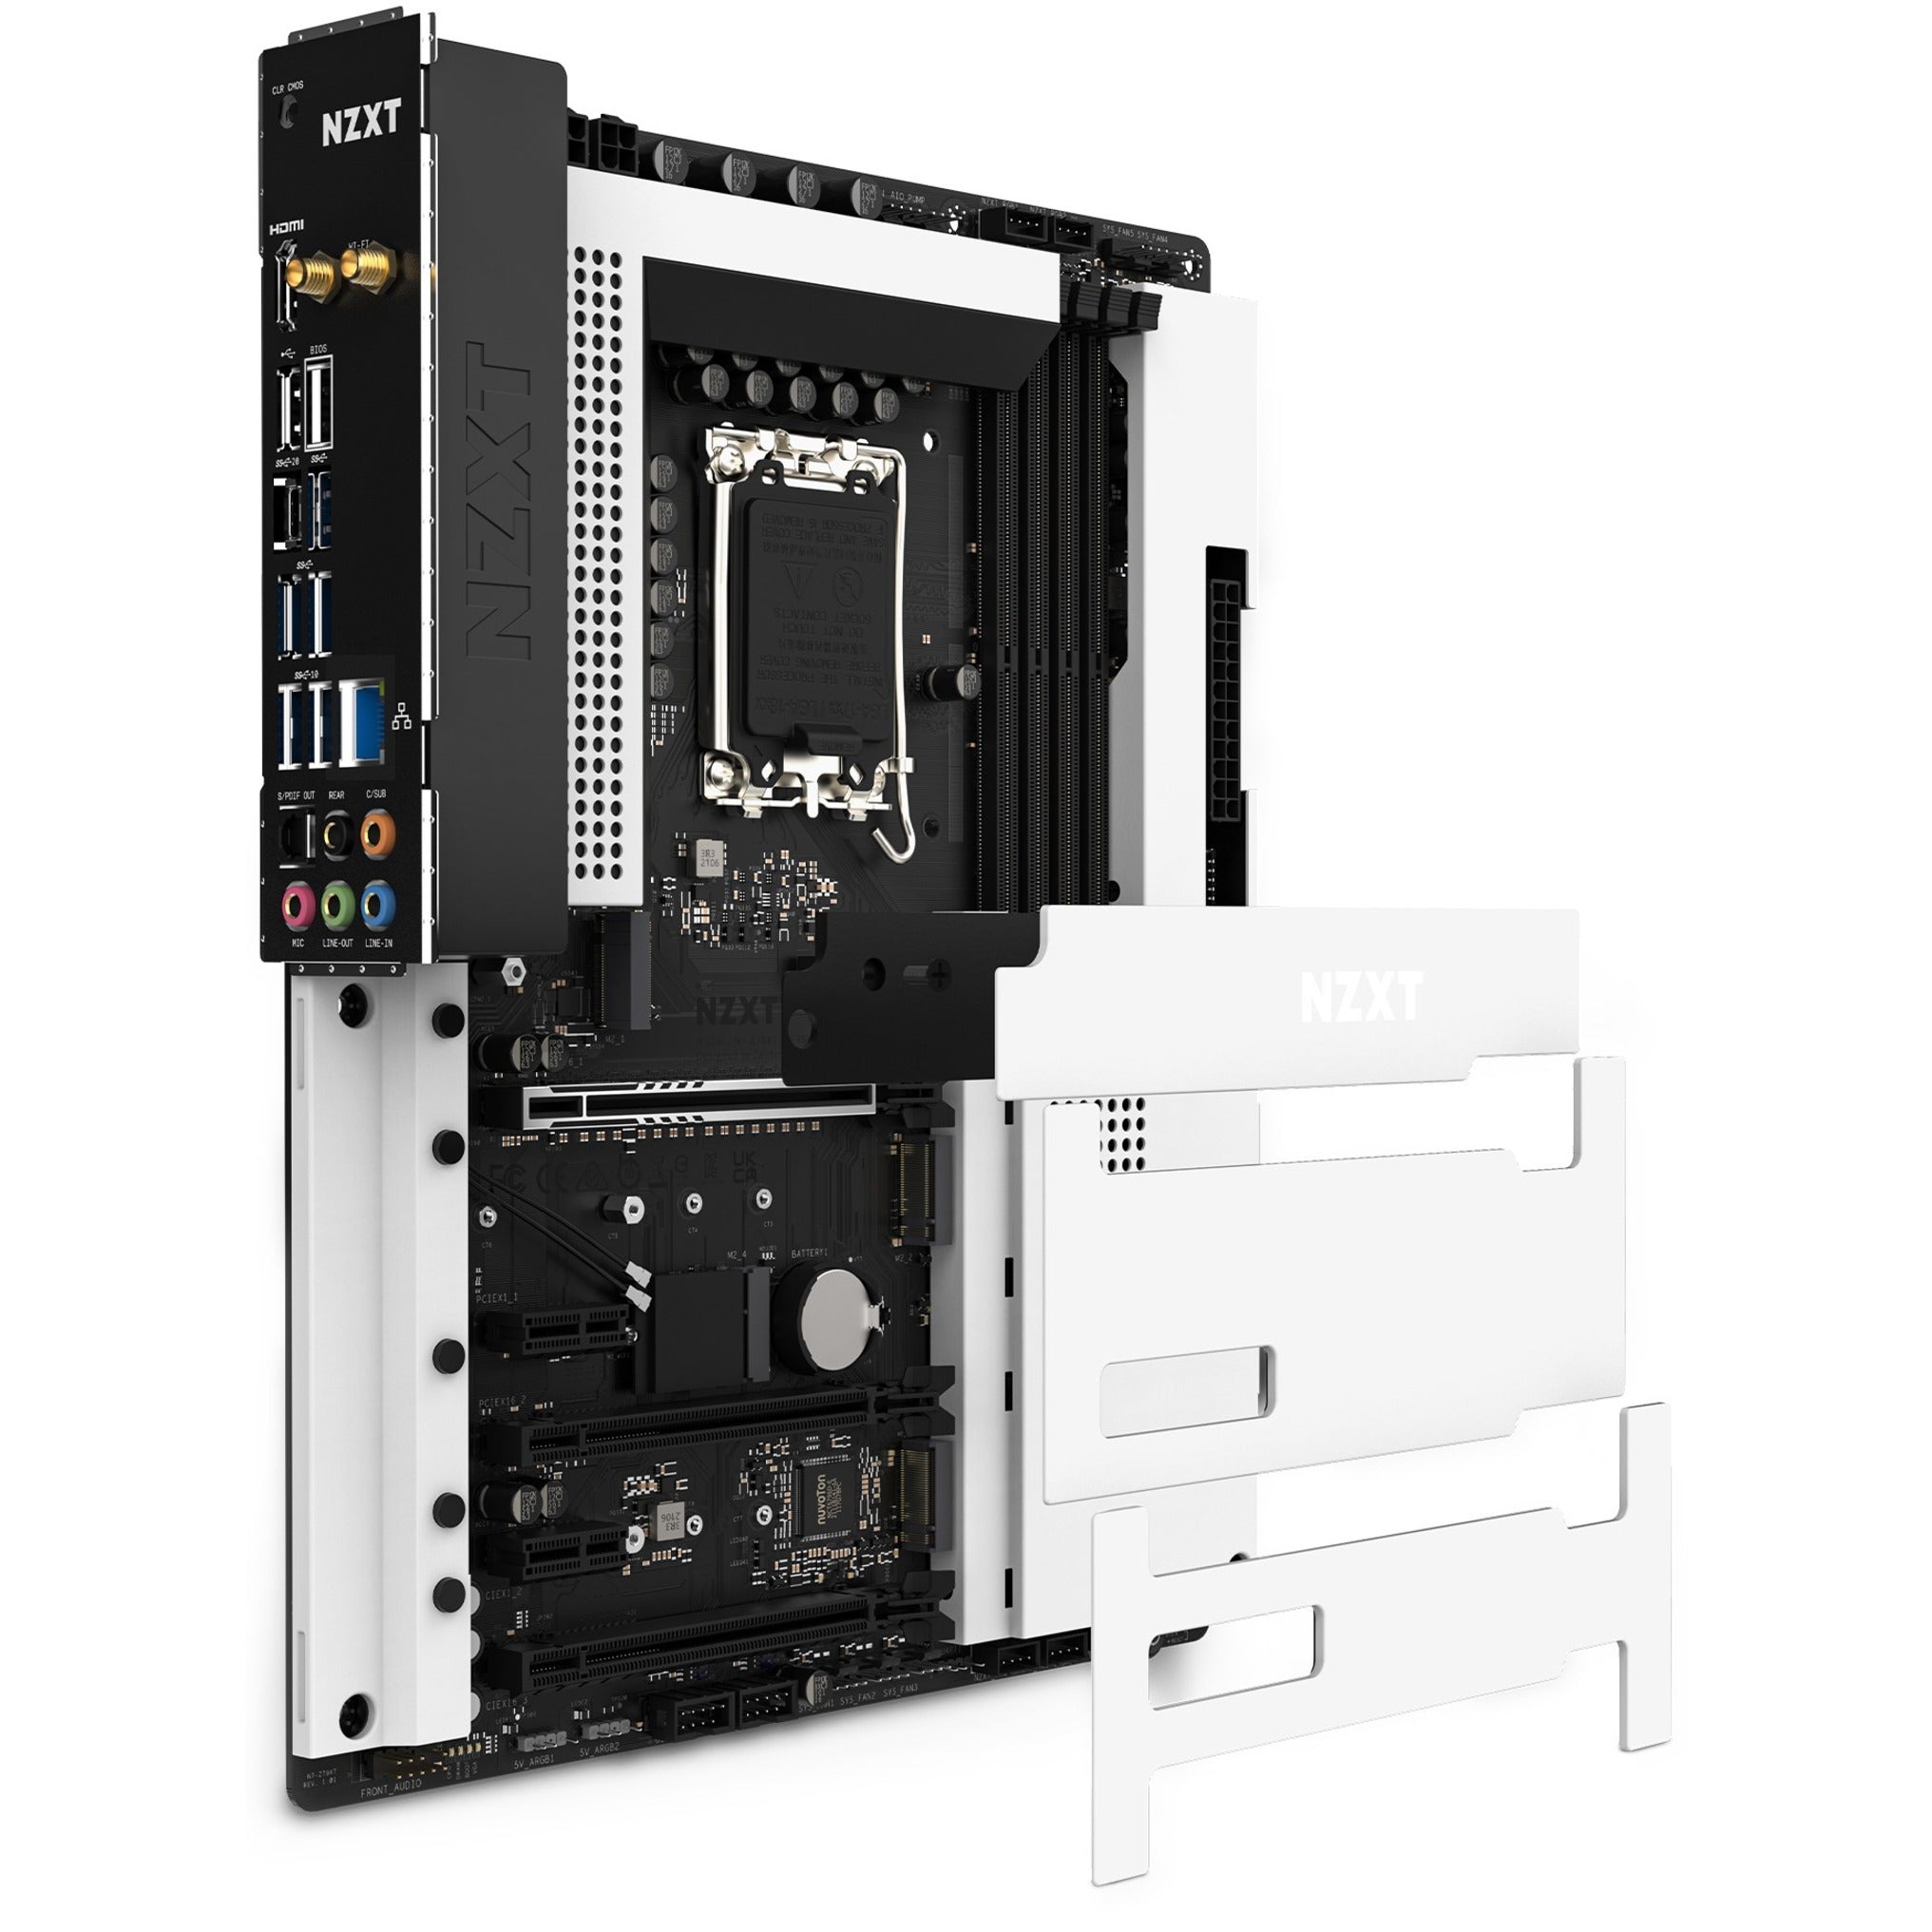 NZXT N7-Z79XT-W1 Desktop Motherboard, Intel Z790 Chipset with Wi-Fi and White Cover